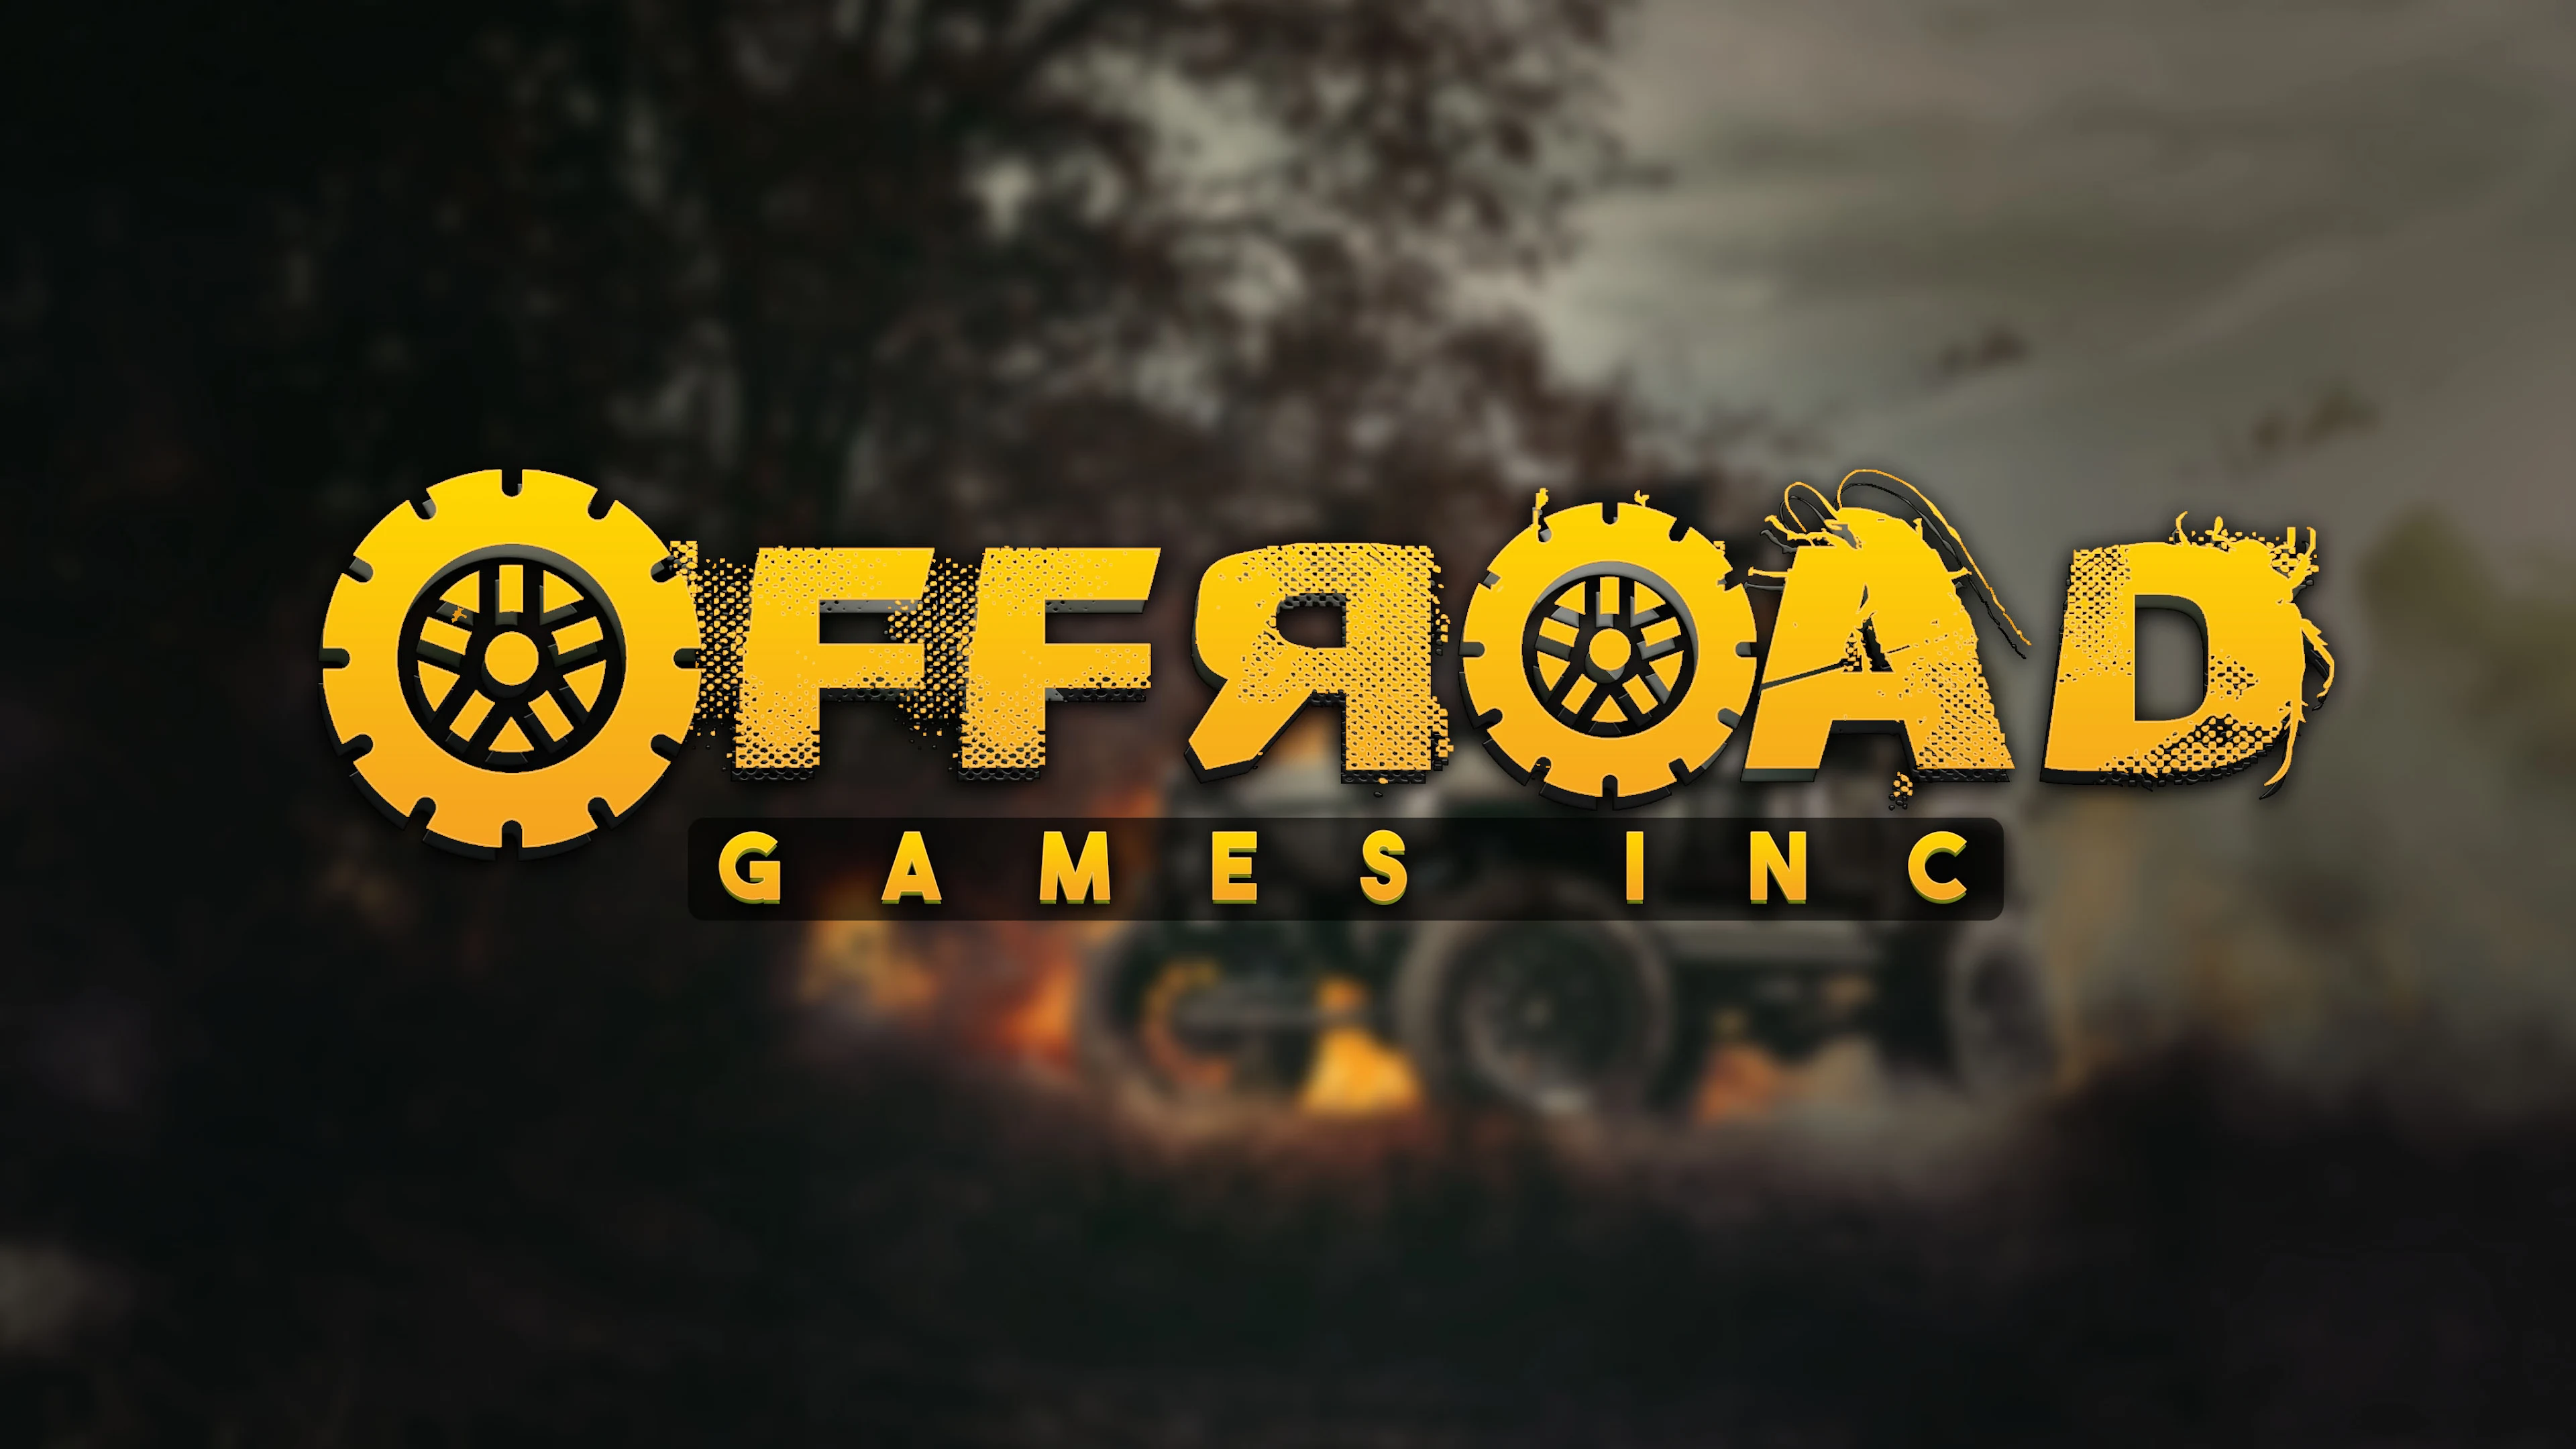 Android Apps by Offroad Games Simulation on Google Play